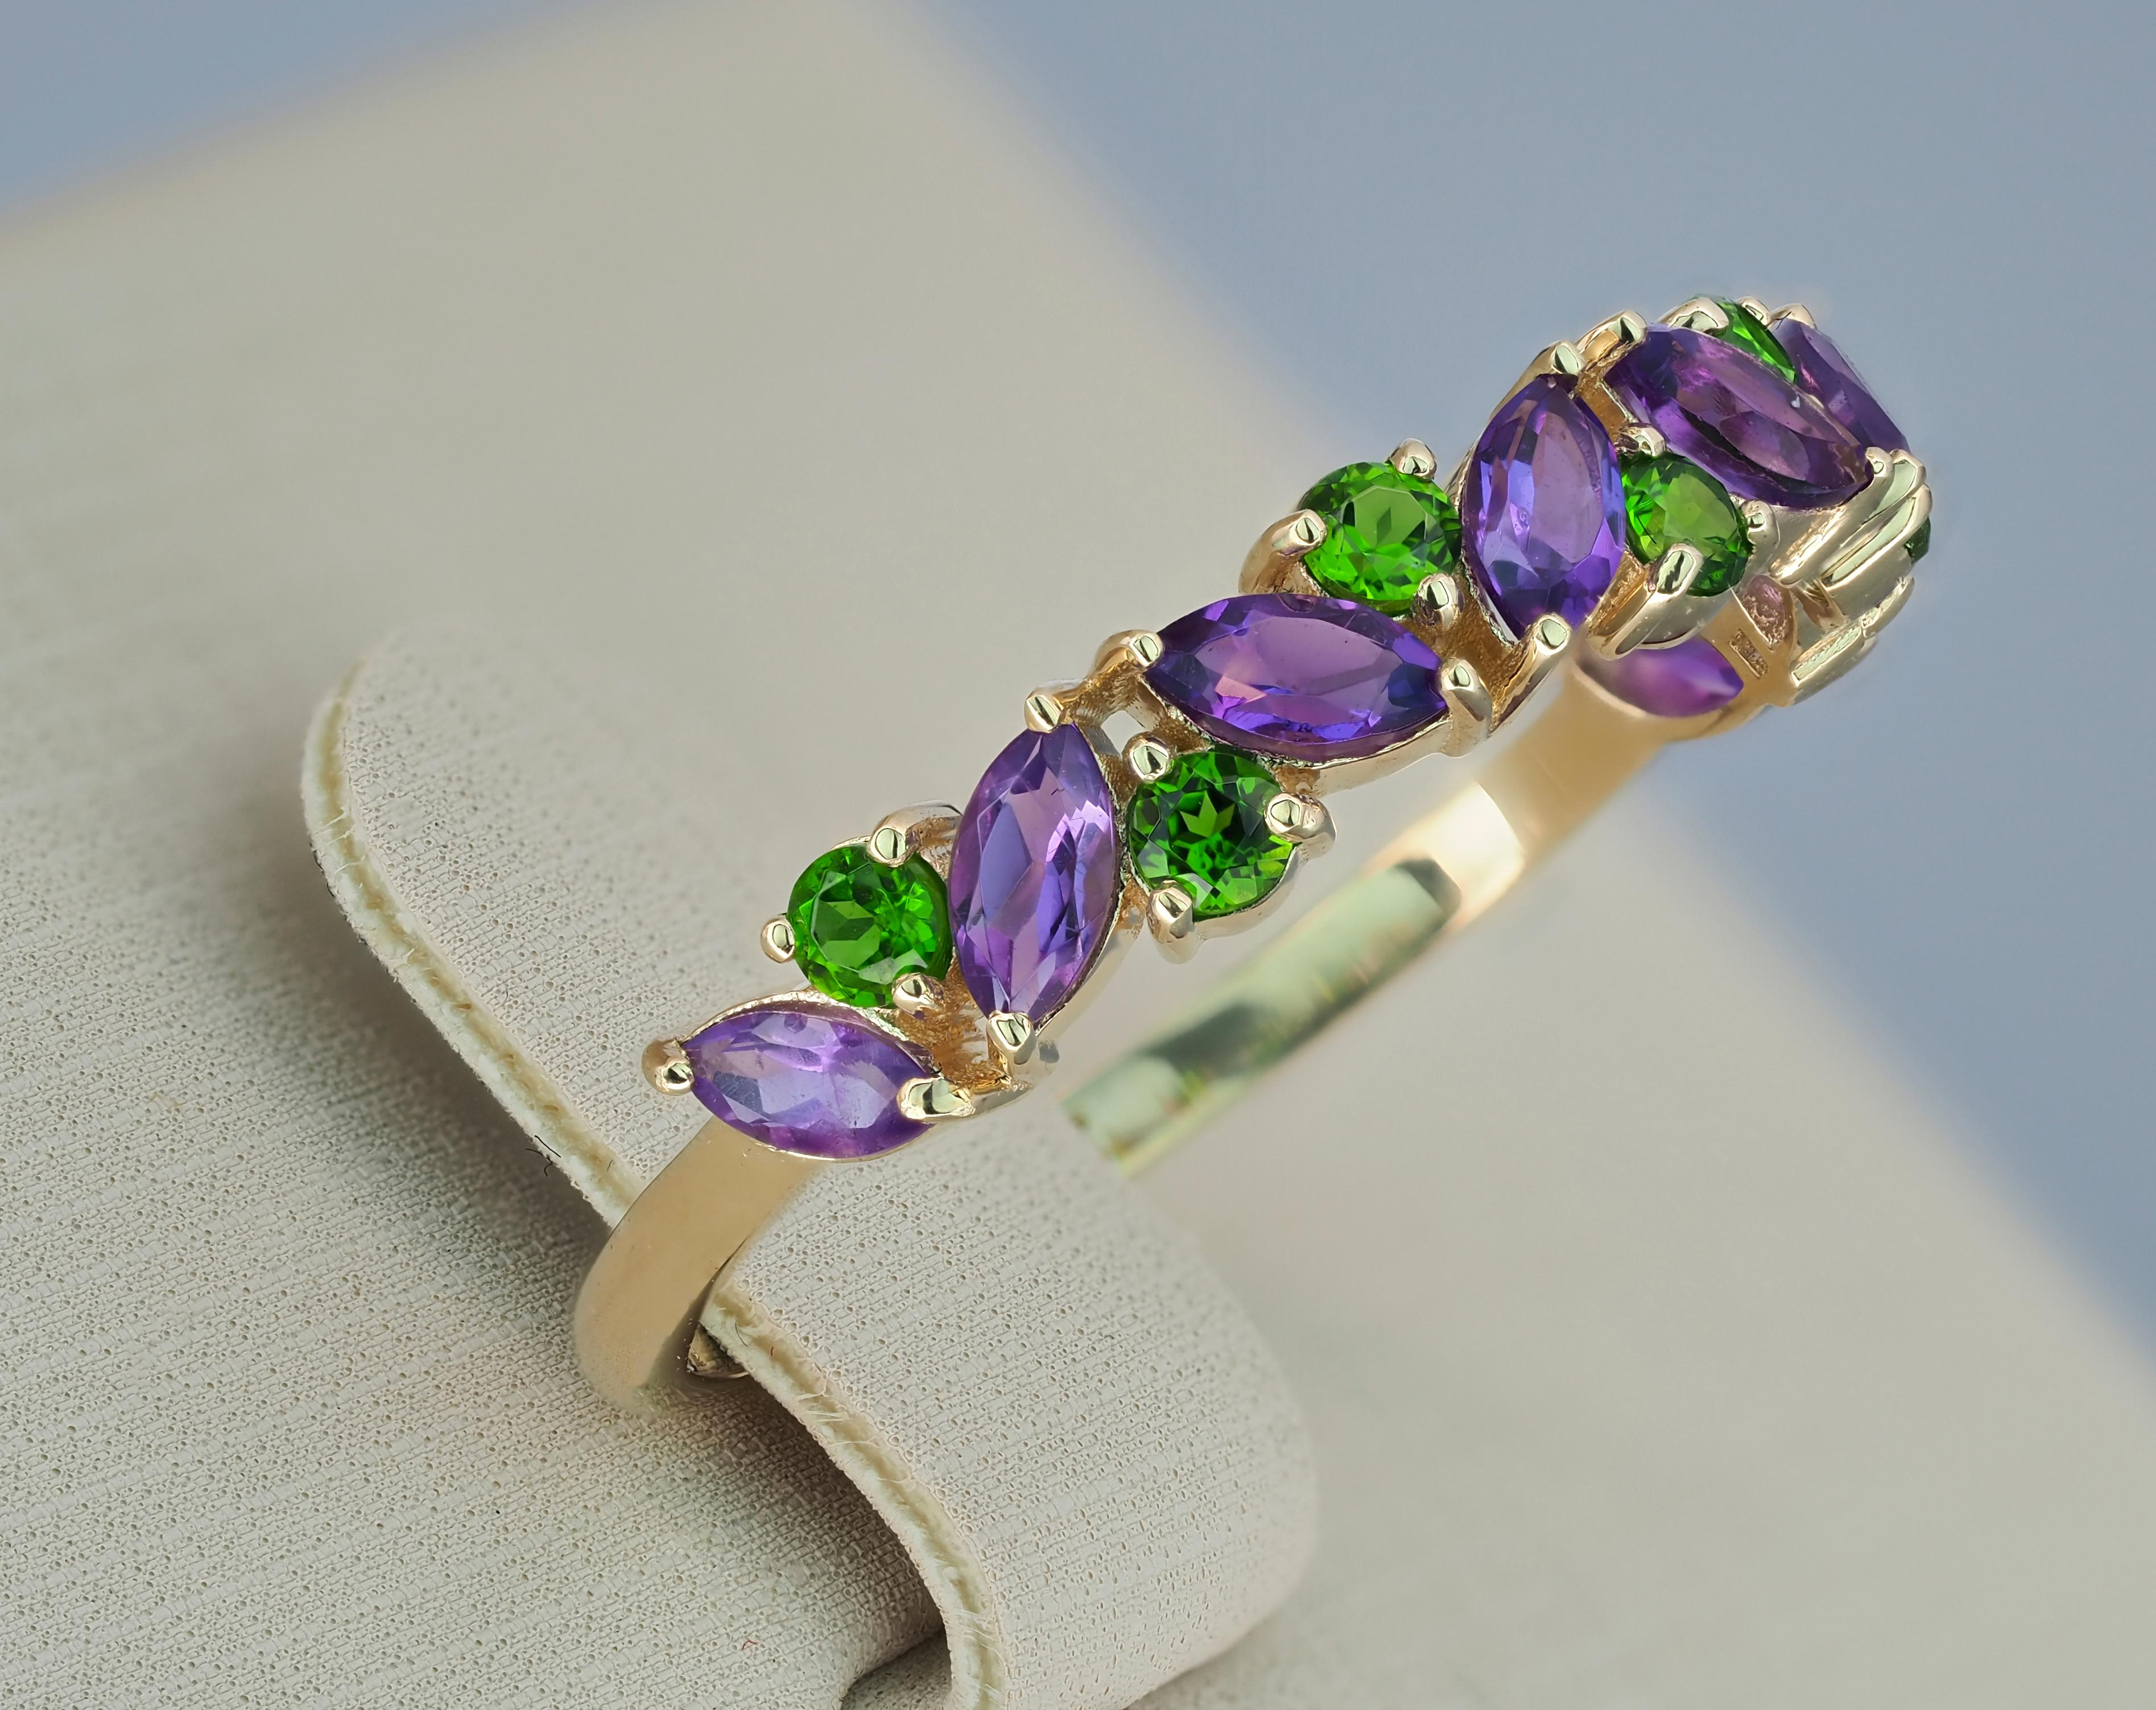 For Sale:  14k Gold Half Eternity Ring with Natural Amethyst and Chrome Diopside 7